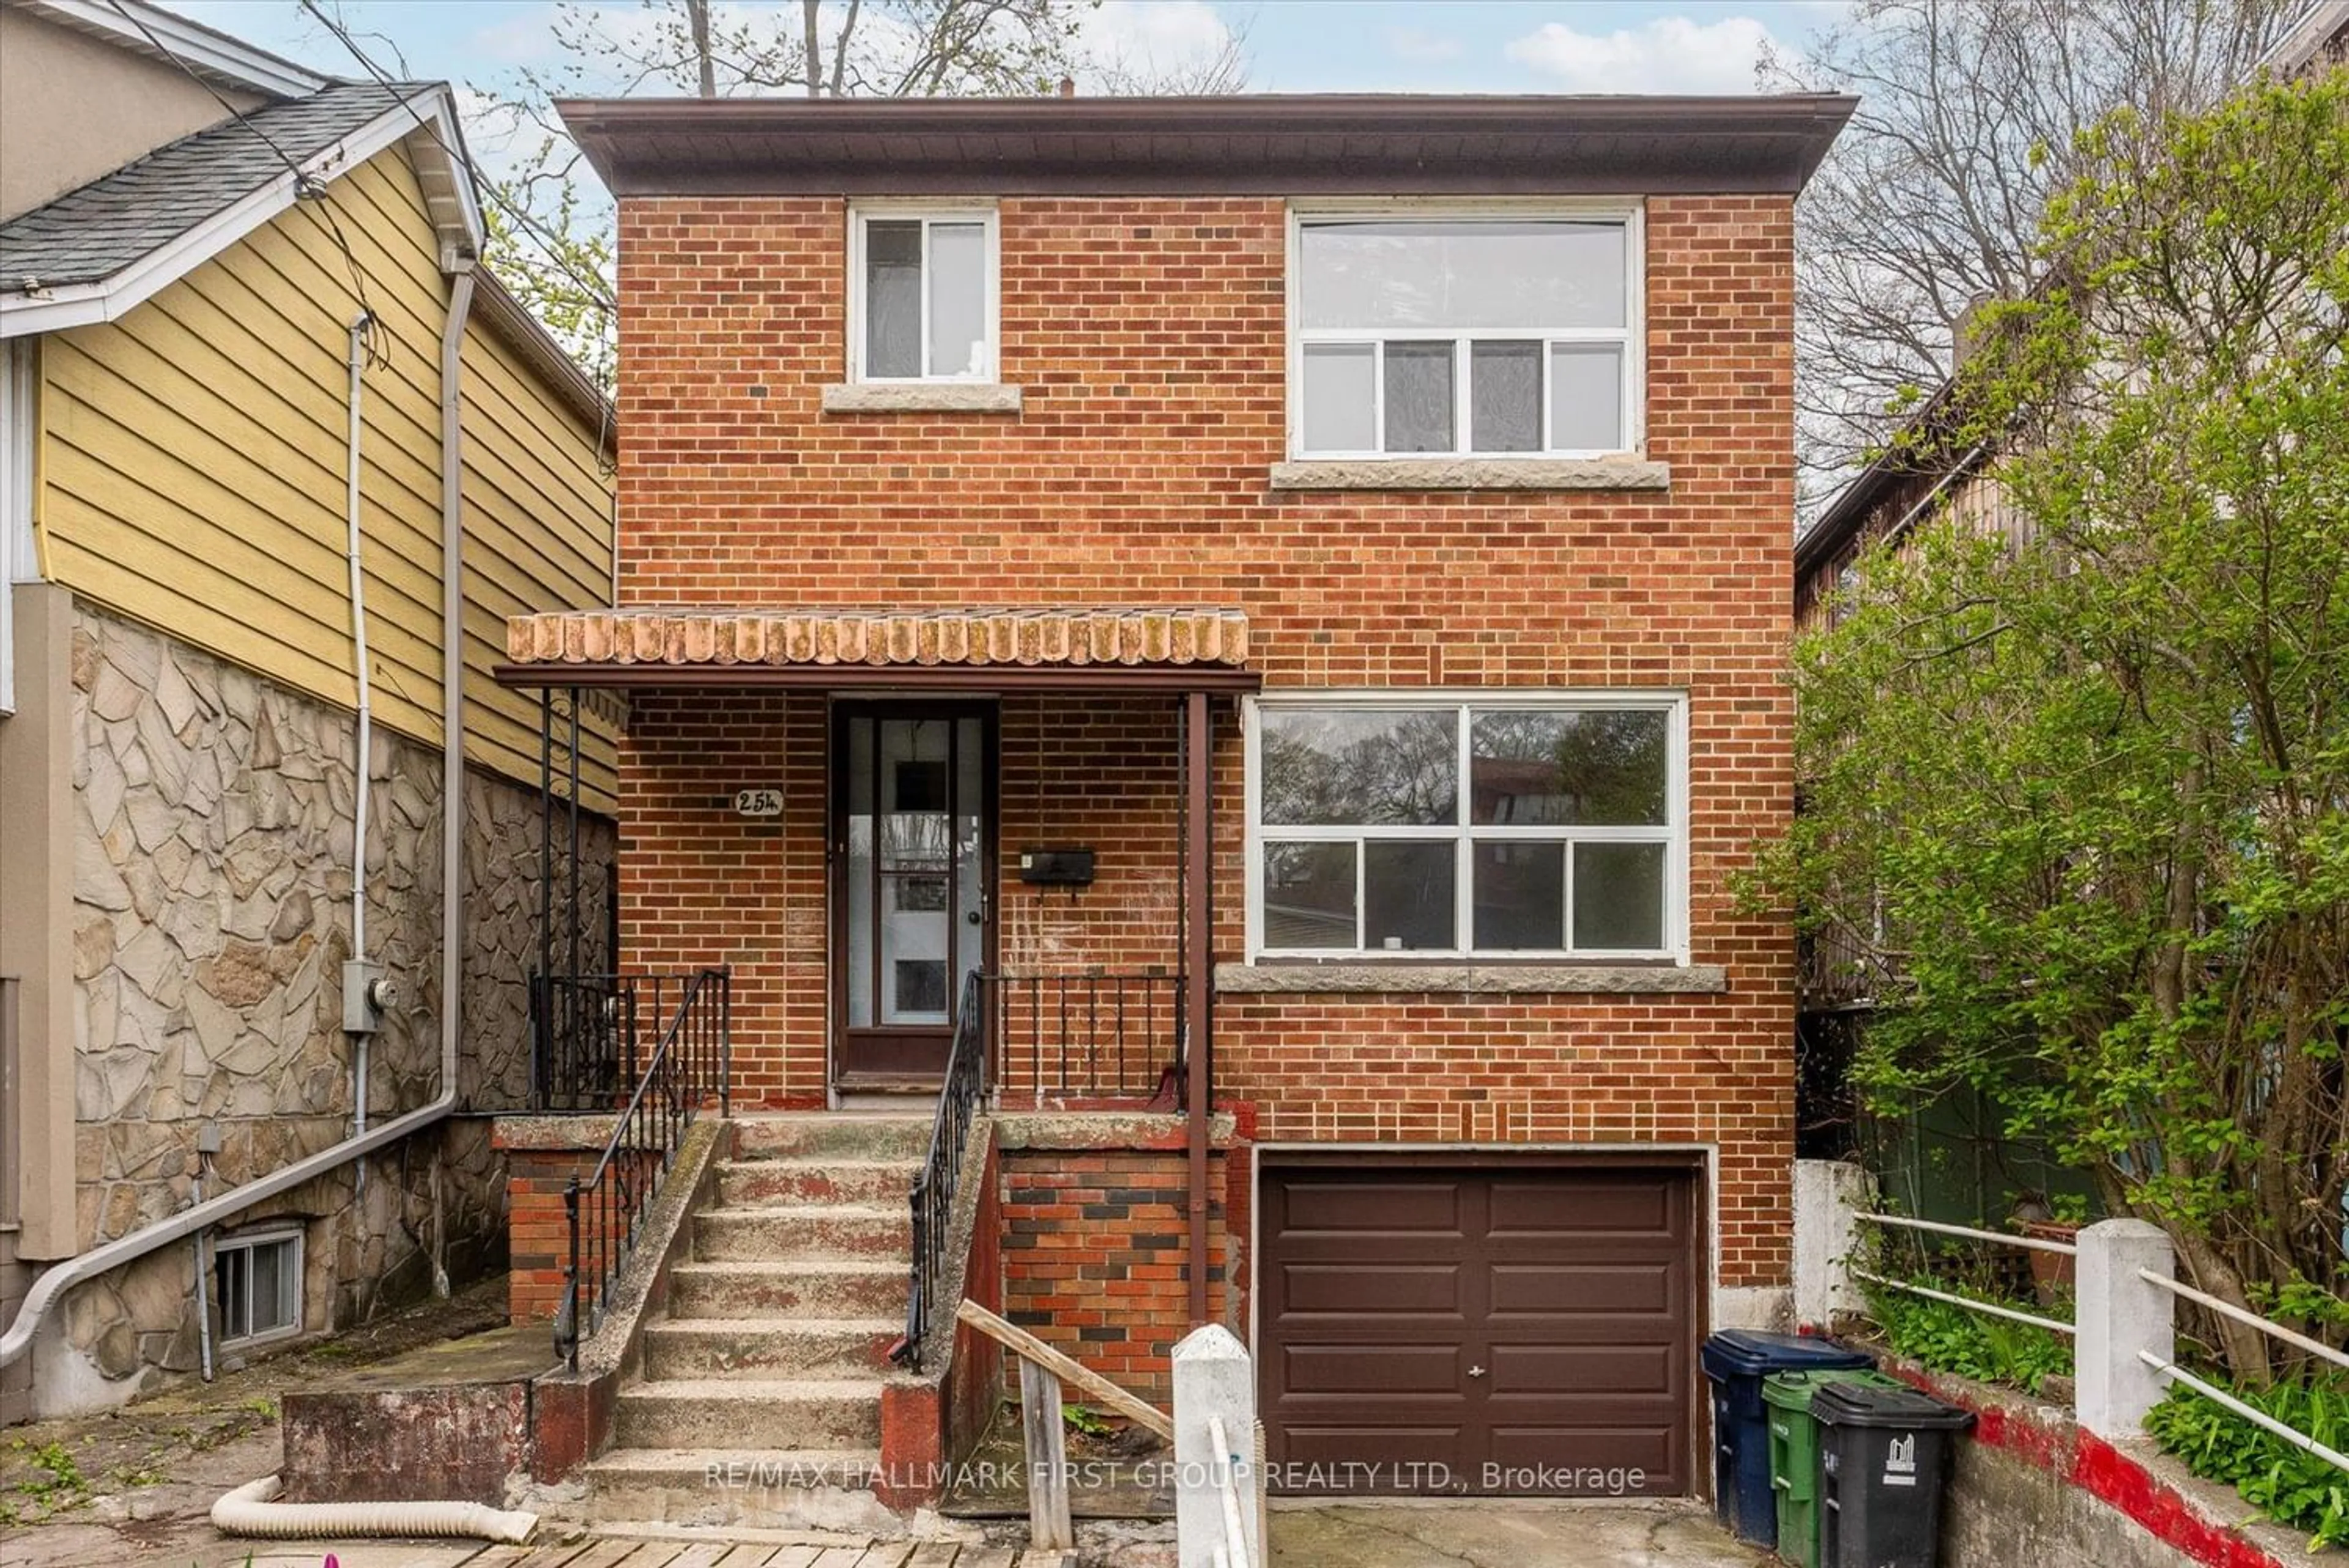 Home with brick exterior material for 254 Hastings Ave, Toronto Ontario M4L 2M1